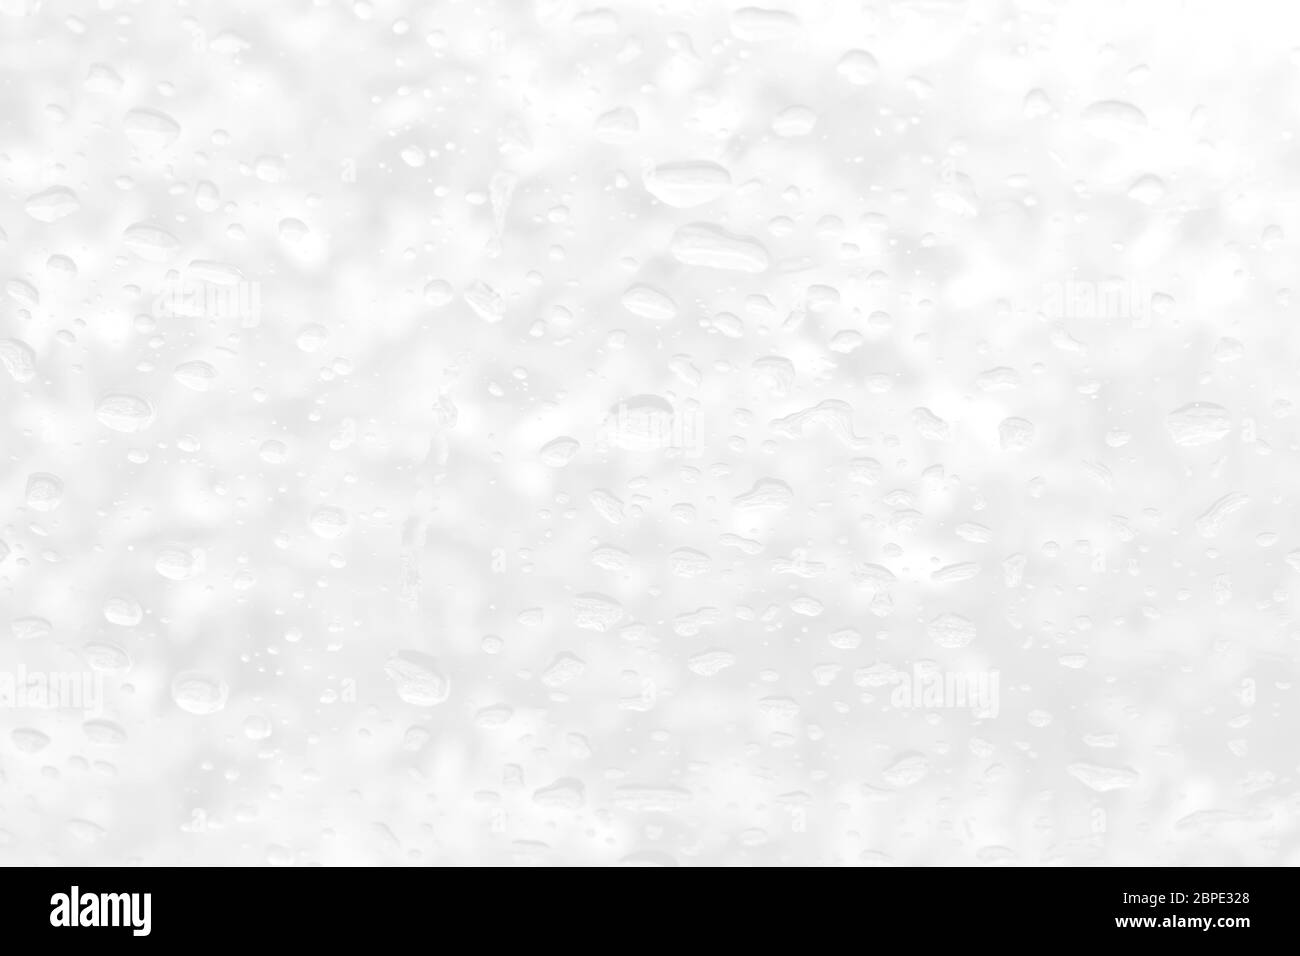 Abstract grey and white circular circle background. Close up of raindrops or water drops on a clear window glass surface. Halftone perspective modern Stock Photo